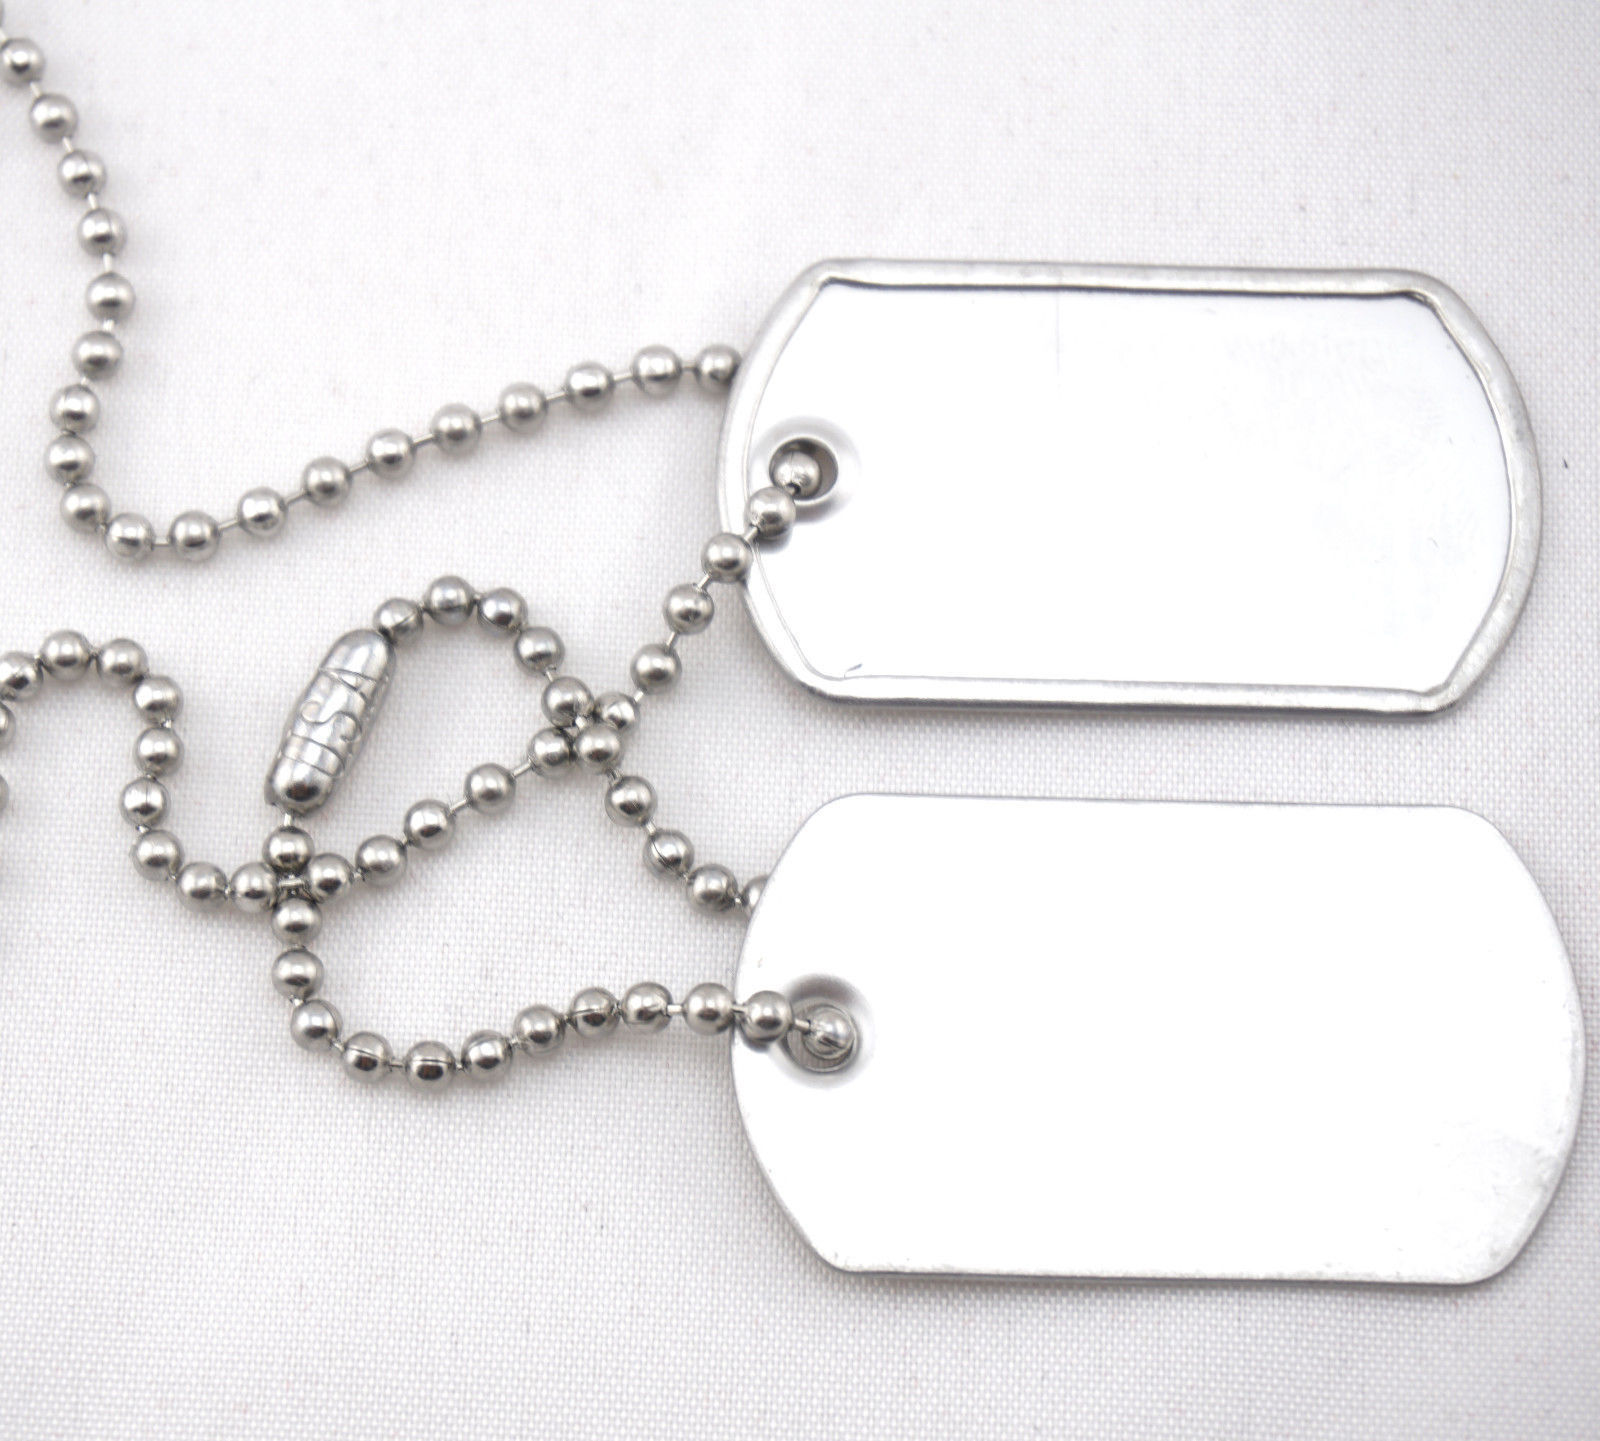 Military Army Blank Shiny Finish Mini Dog Tag Set w/ Stainless Steel Ball Chains